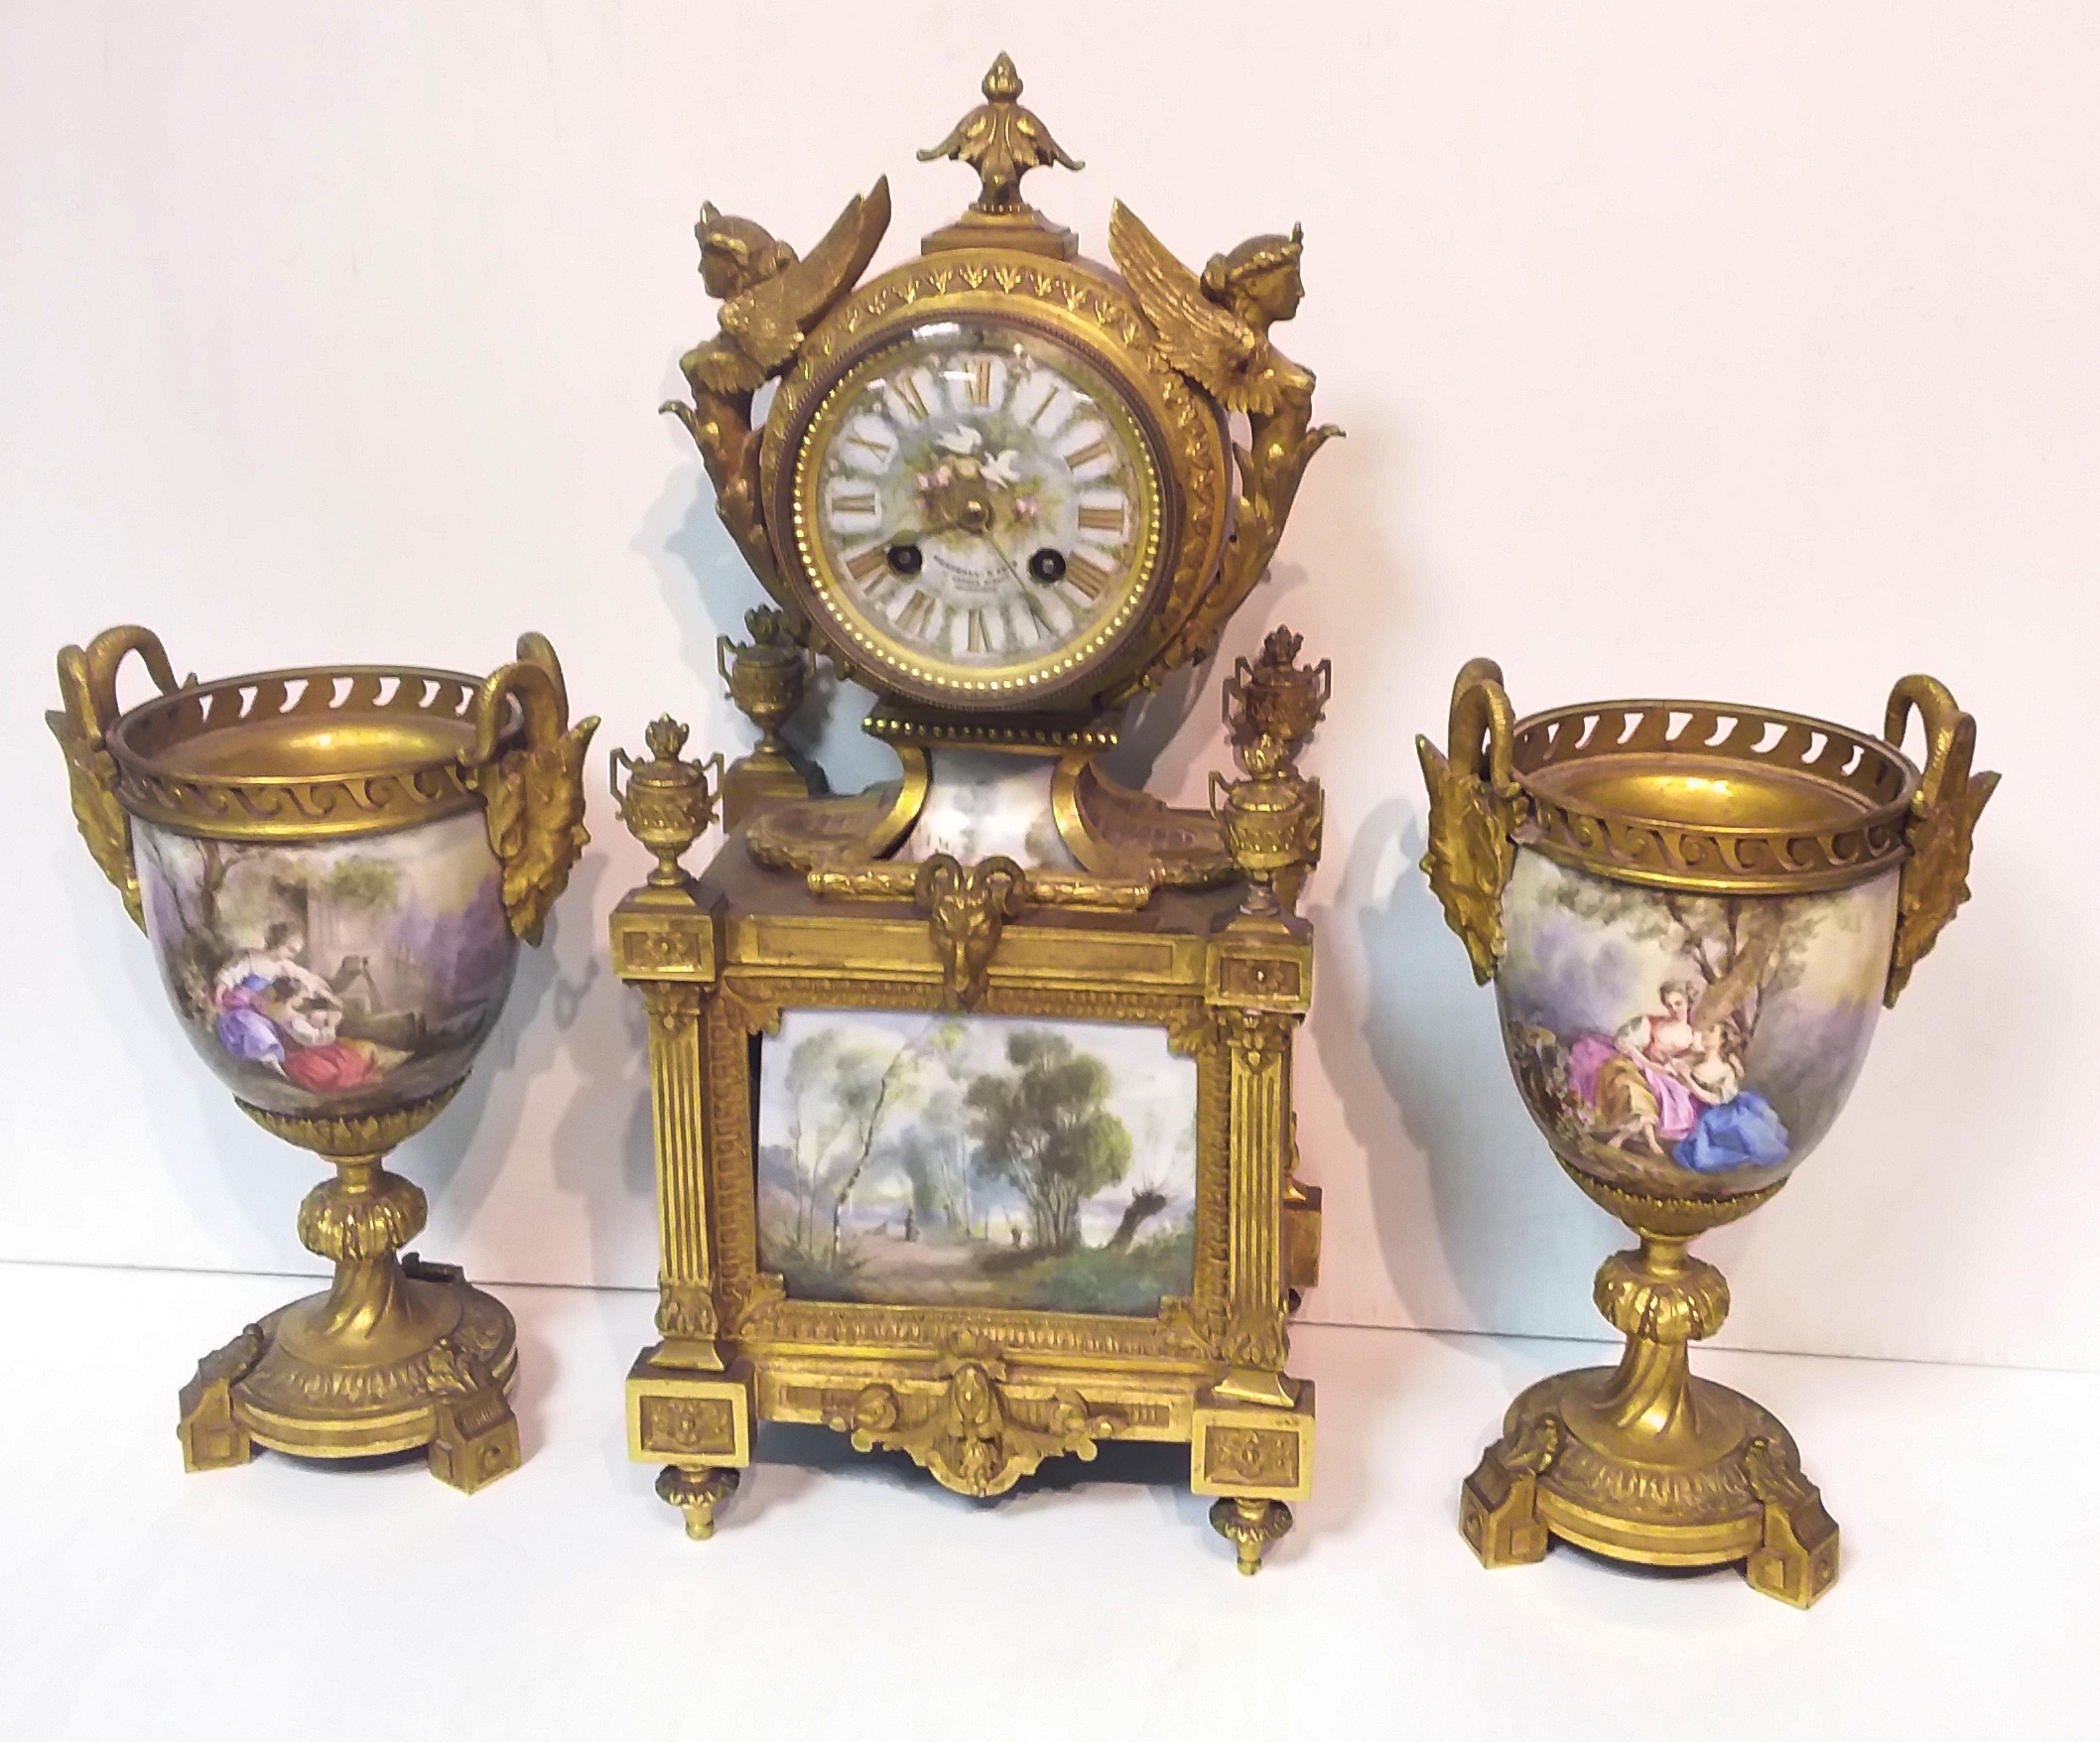 Vict French Ormolu 3 Pce Clock Set with Ormolu Mount & Hand Painted Sevres Panels by Marshall &